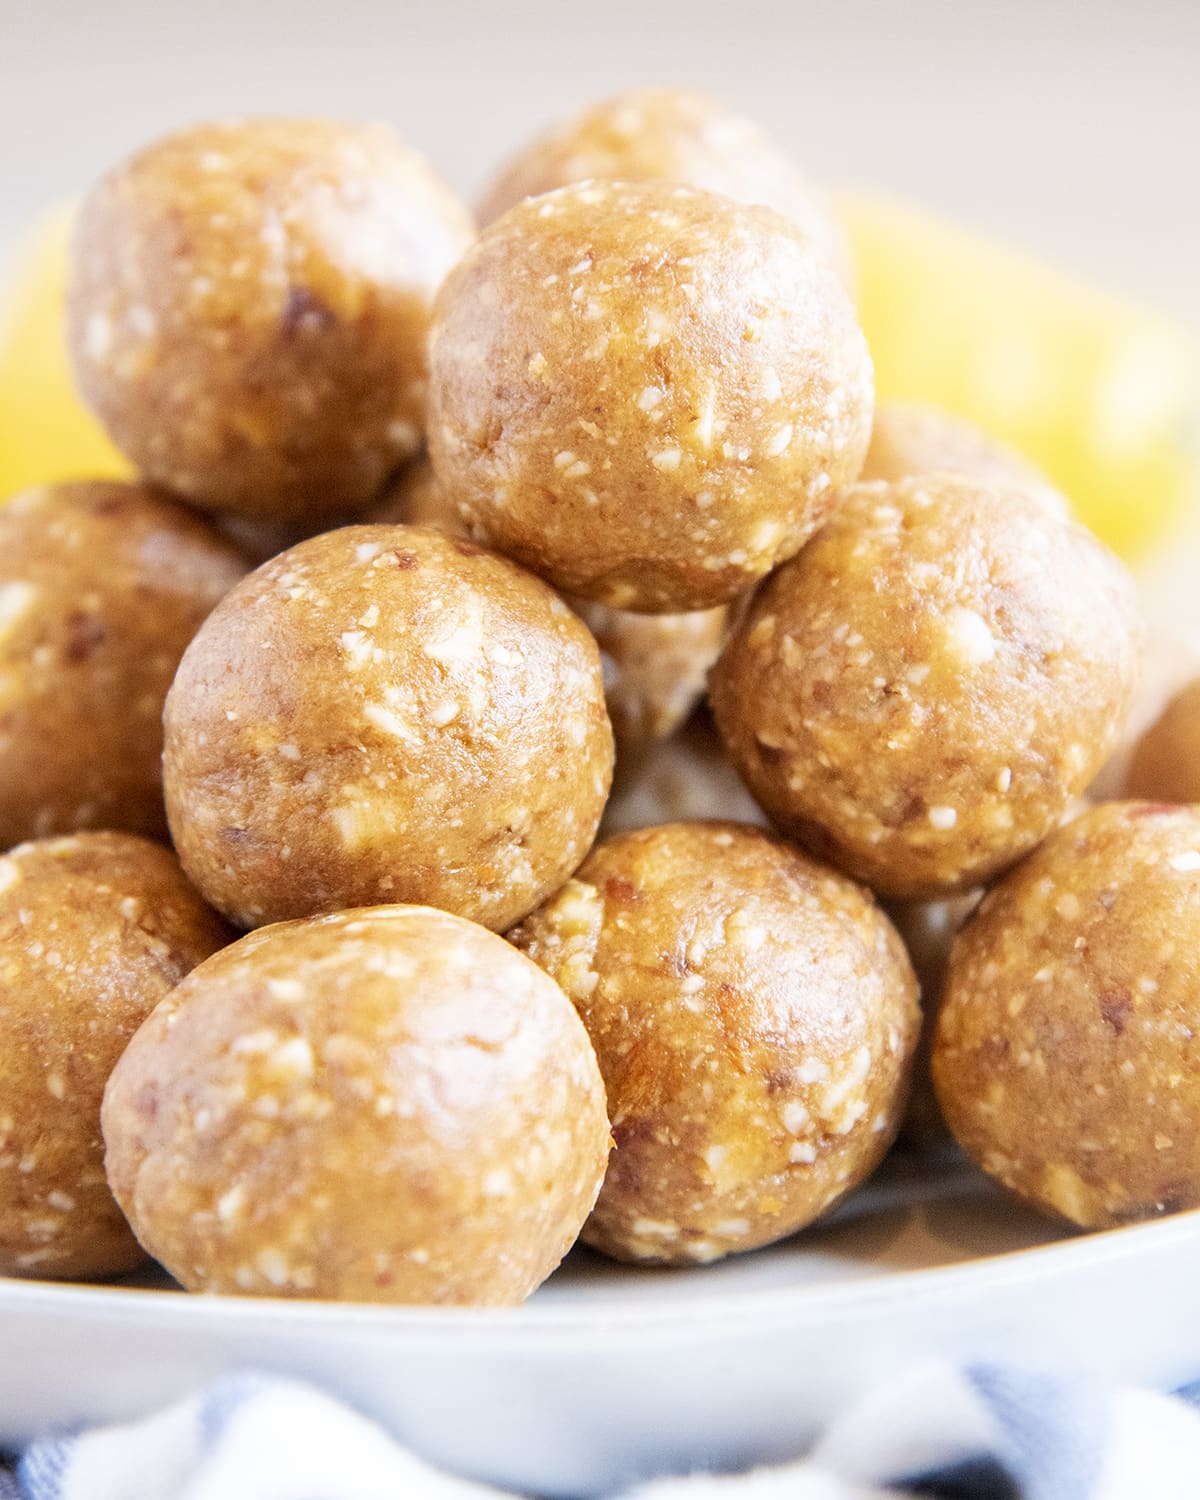 A close up of a pile of energy balls with lemons behind them.